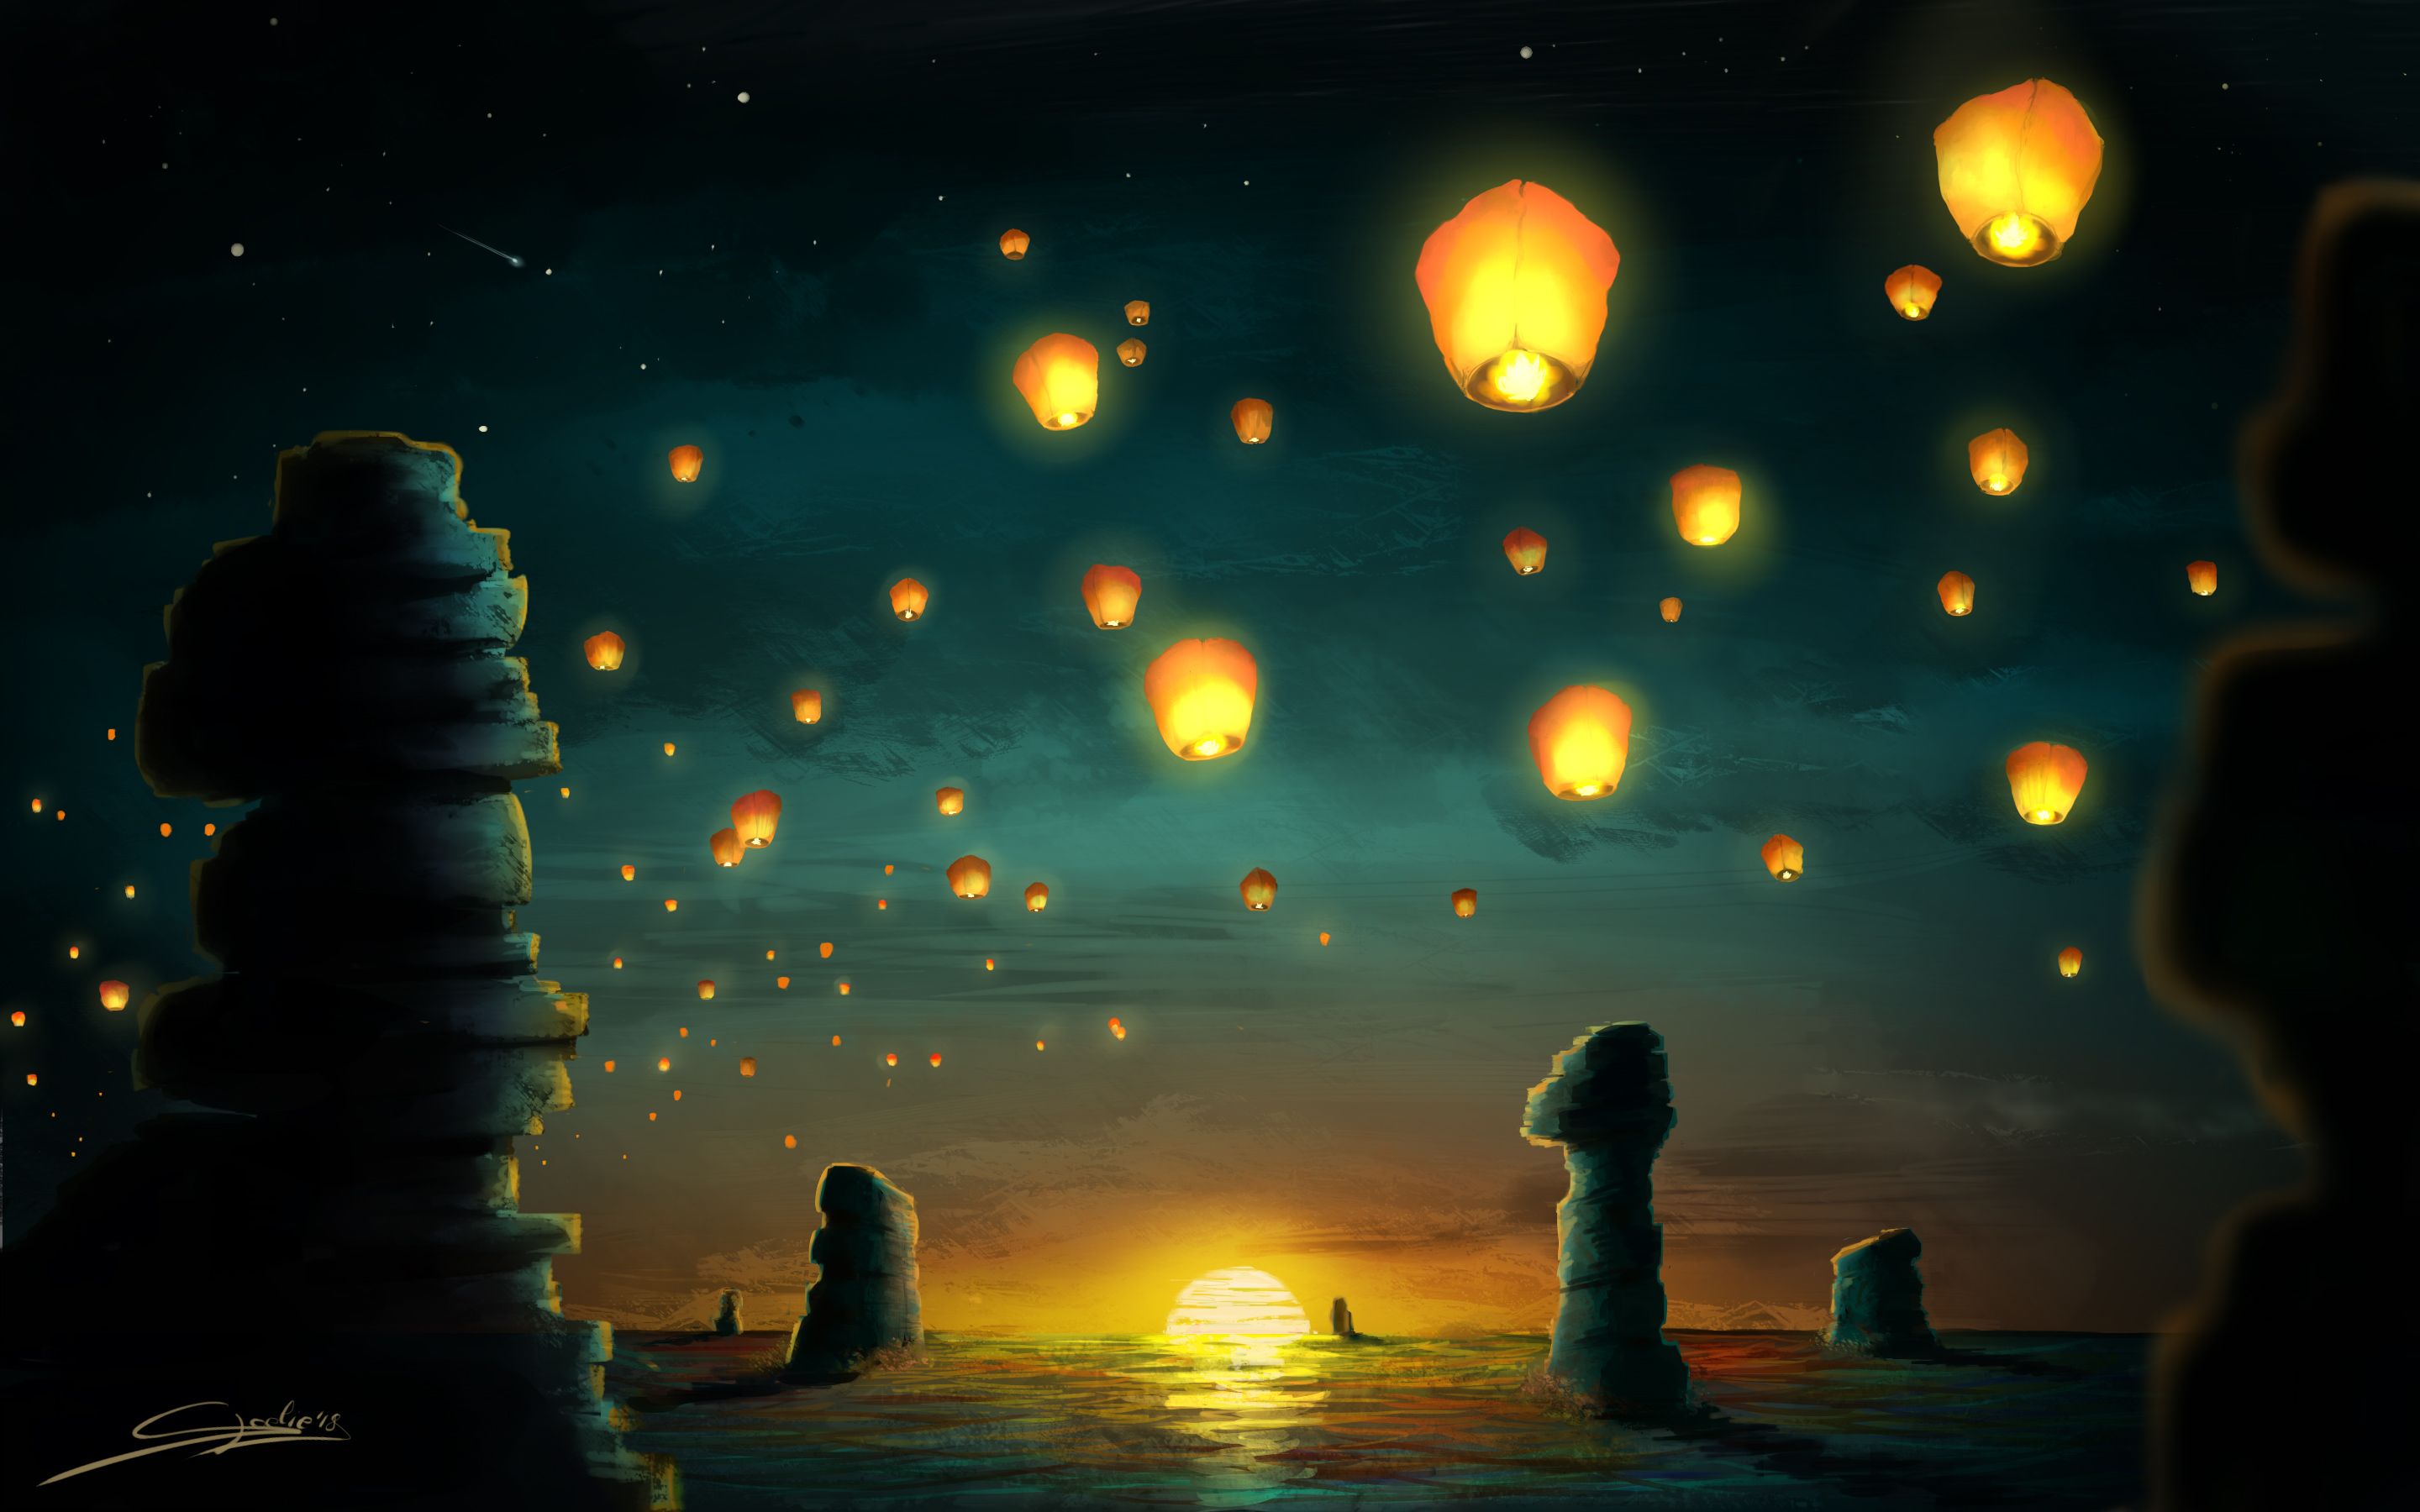 Sunset Lanterns, HD Artist, 4k Wallpaper, Image, Background, Photo and Picture